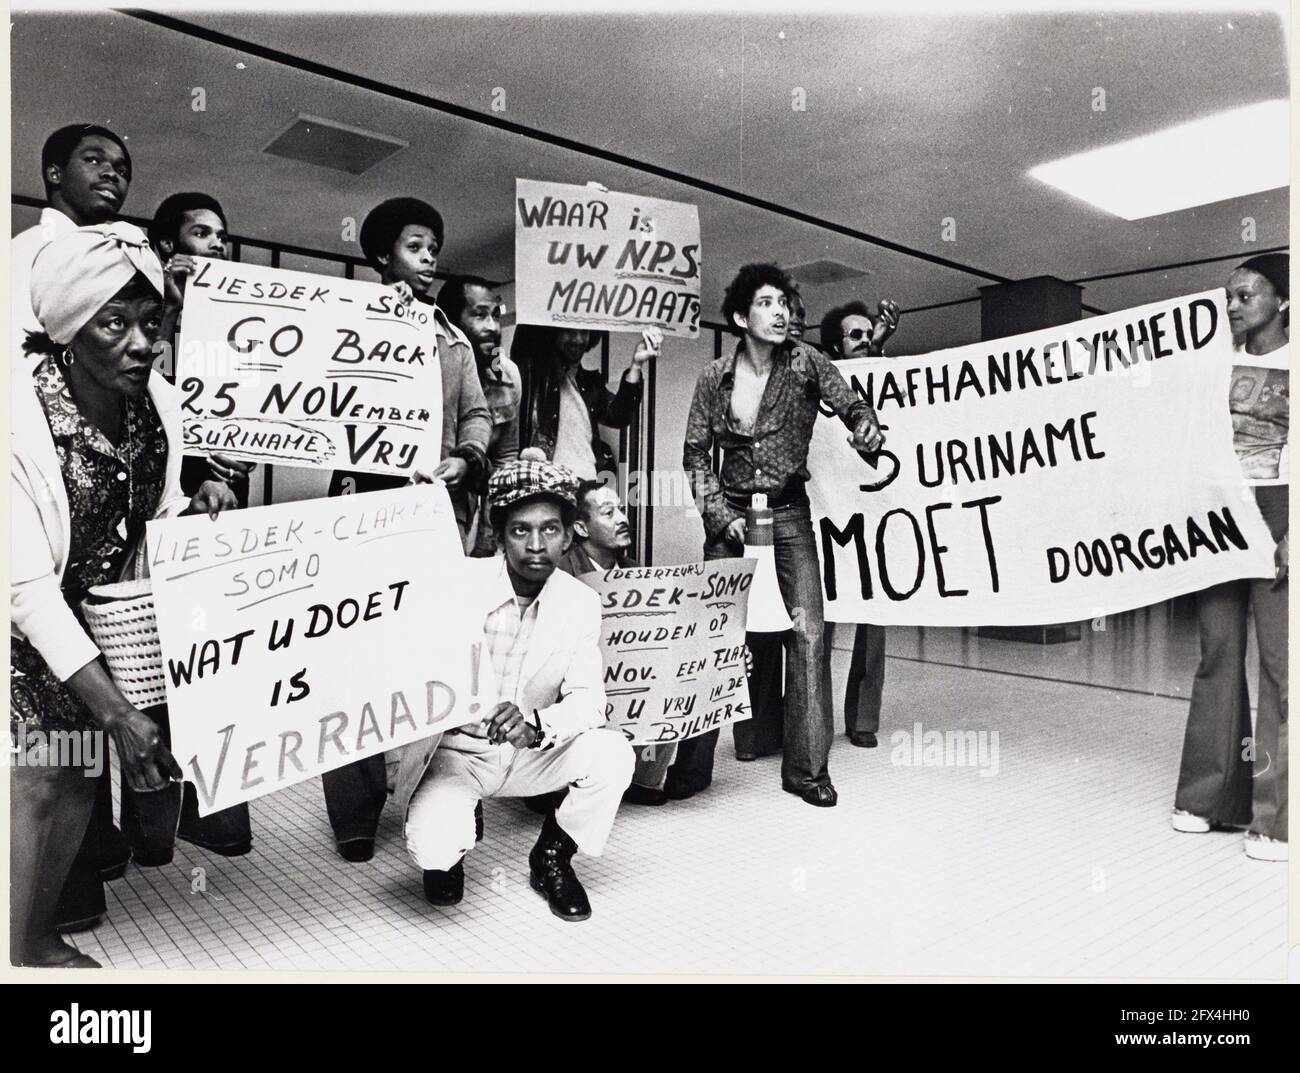 Demonstration at Schiphol Airport for an independent Suriname, Image file OSIM00007000165, The Netherlands, 20th century press agency photo, news to remember, documentary, historic photography 1945-1990, visual stories, human history of the Twentieth Century, capturing moments in time Stock Photo